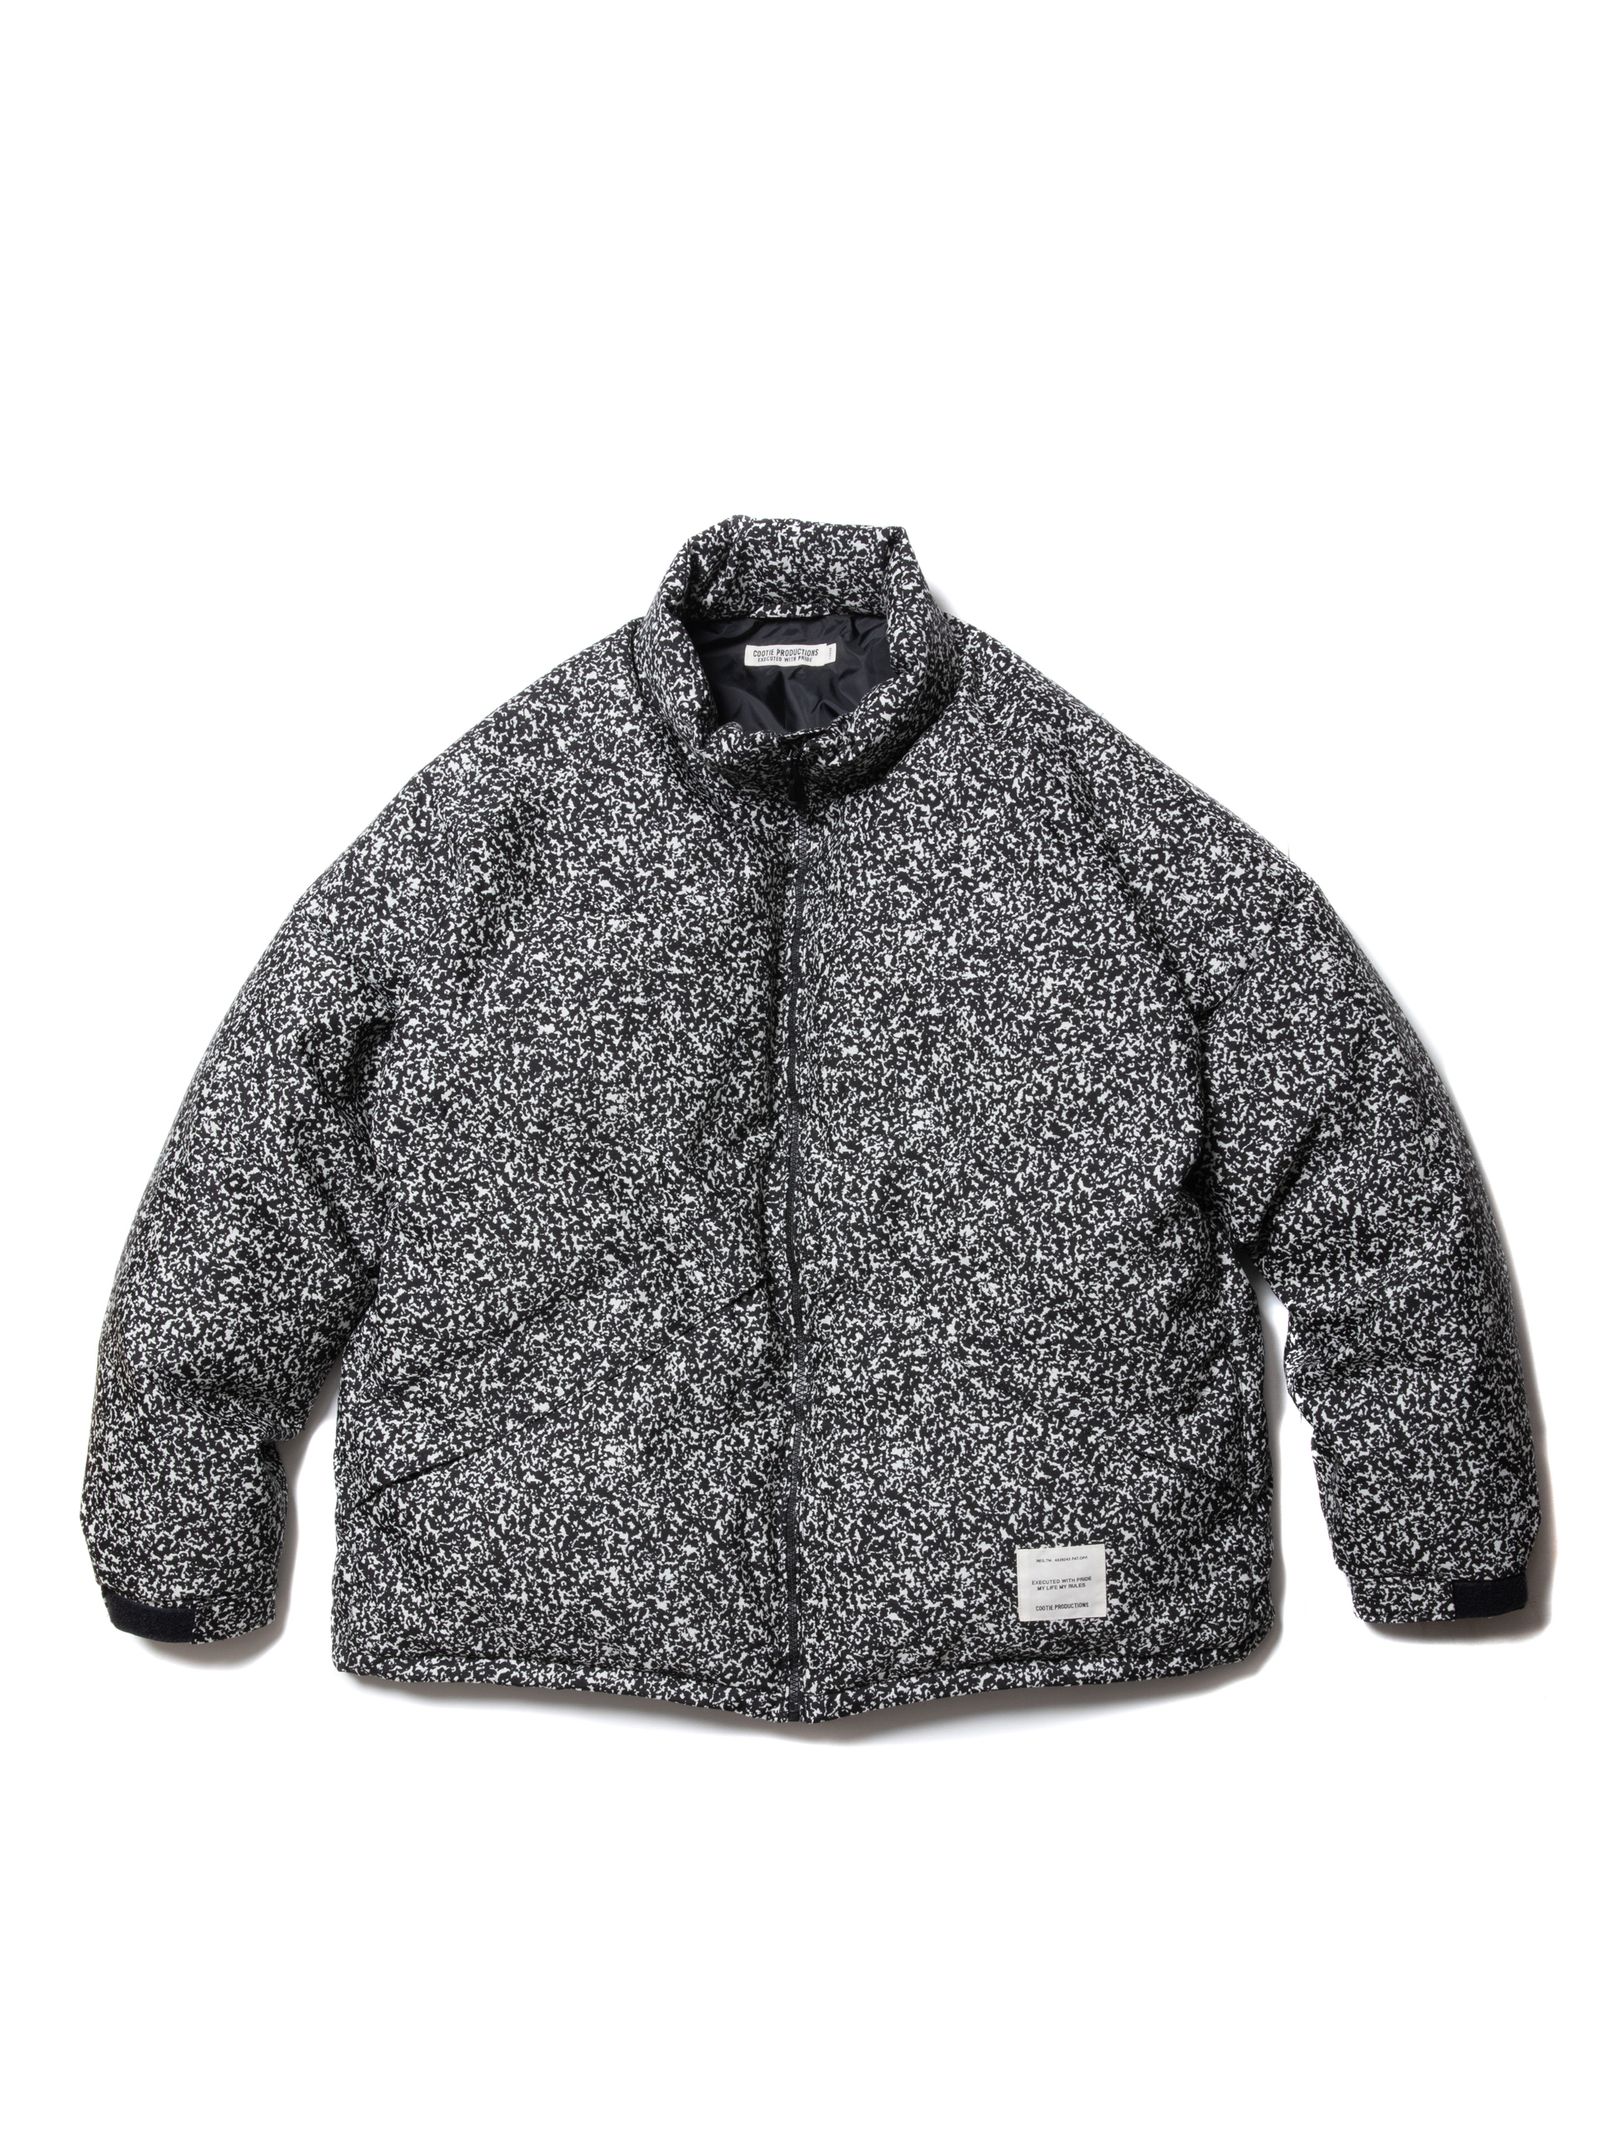 COOTIE PRODUCTIONS - T/W Jacquard Down Jacket (BLACK) / ジャガード ...